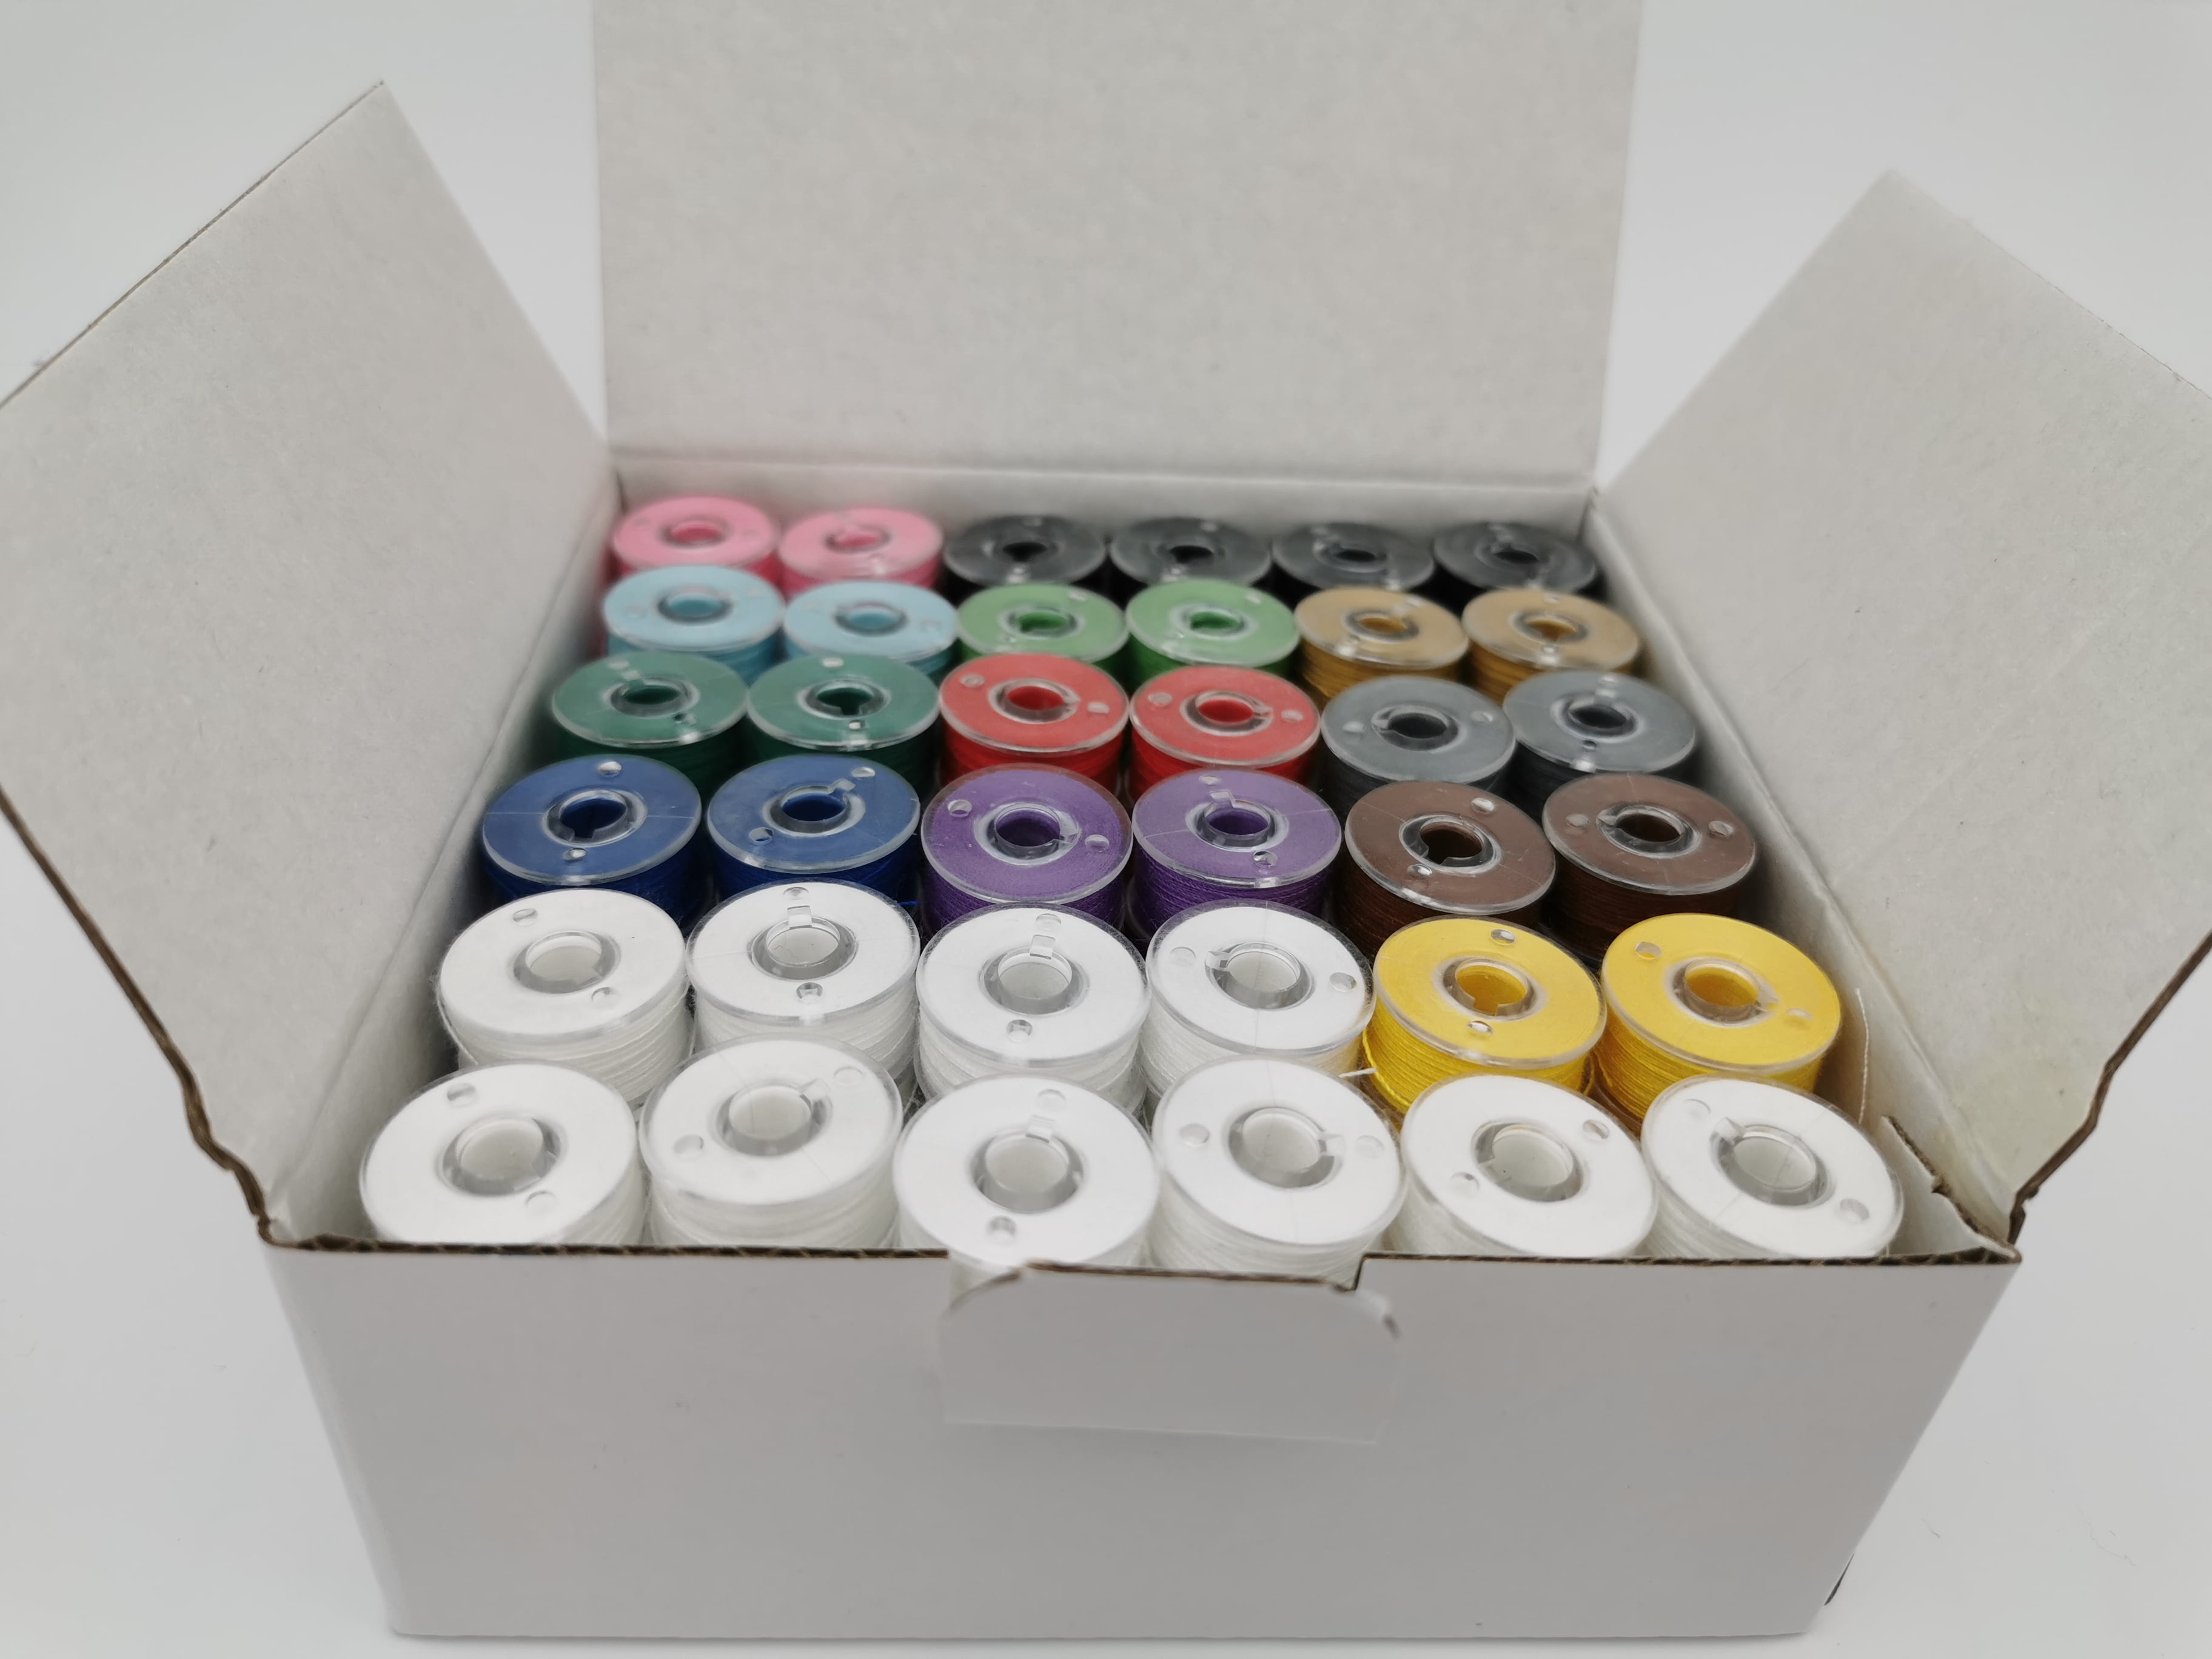 Class 15 Plastic Sided SA156 100% Polyester 144pcs Prewound Bobbins Size A for Domestic Sewing/Embroidery Machines Size A Black Color 15J fit with Brother Embroidery Machines 60S/2 100 Yards 